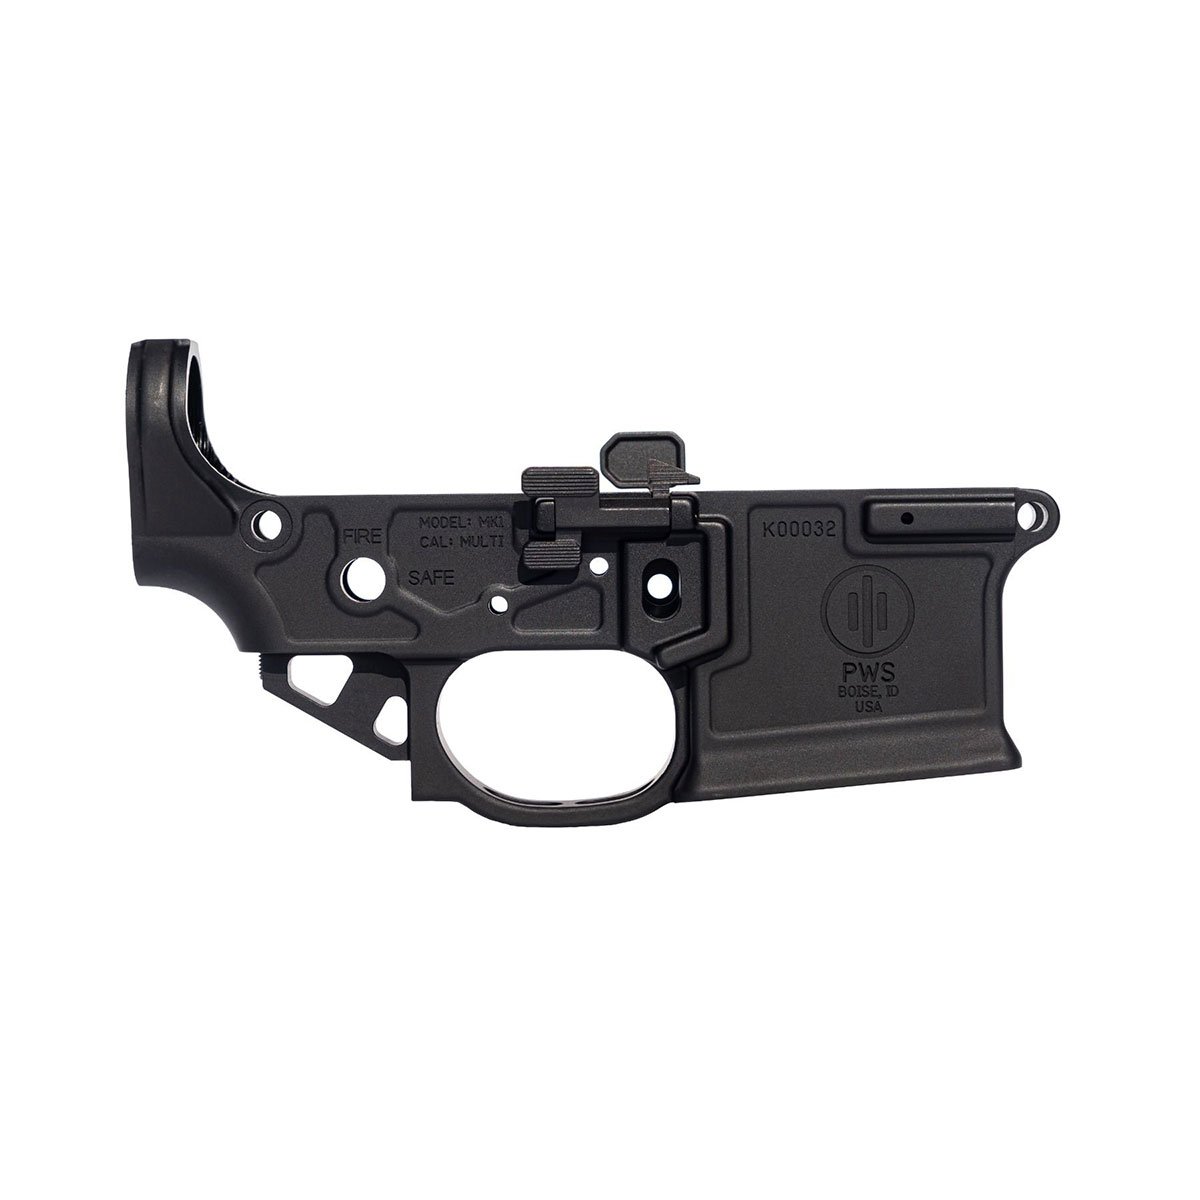 PRIMARY WEAPONS - MK1 MOD 2-M STRIPPED LOWER RECEIVER